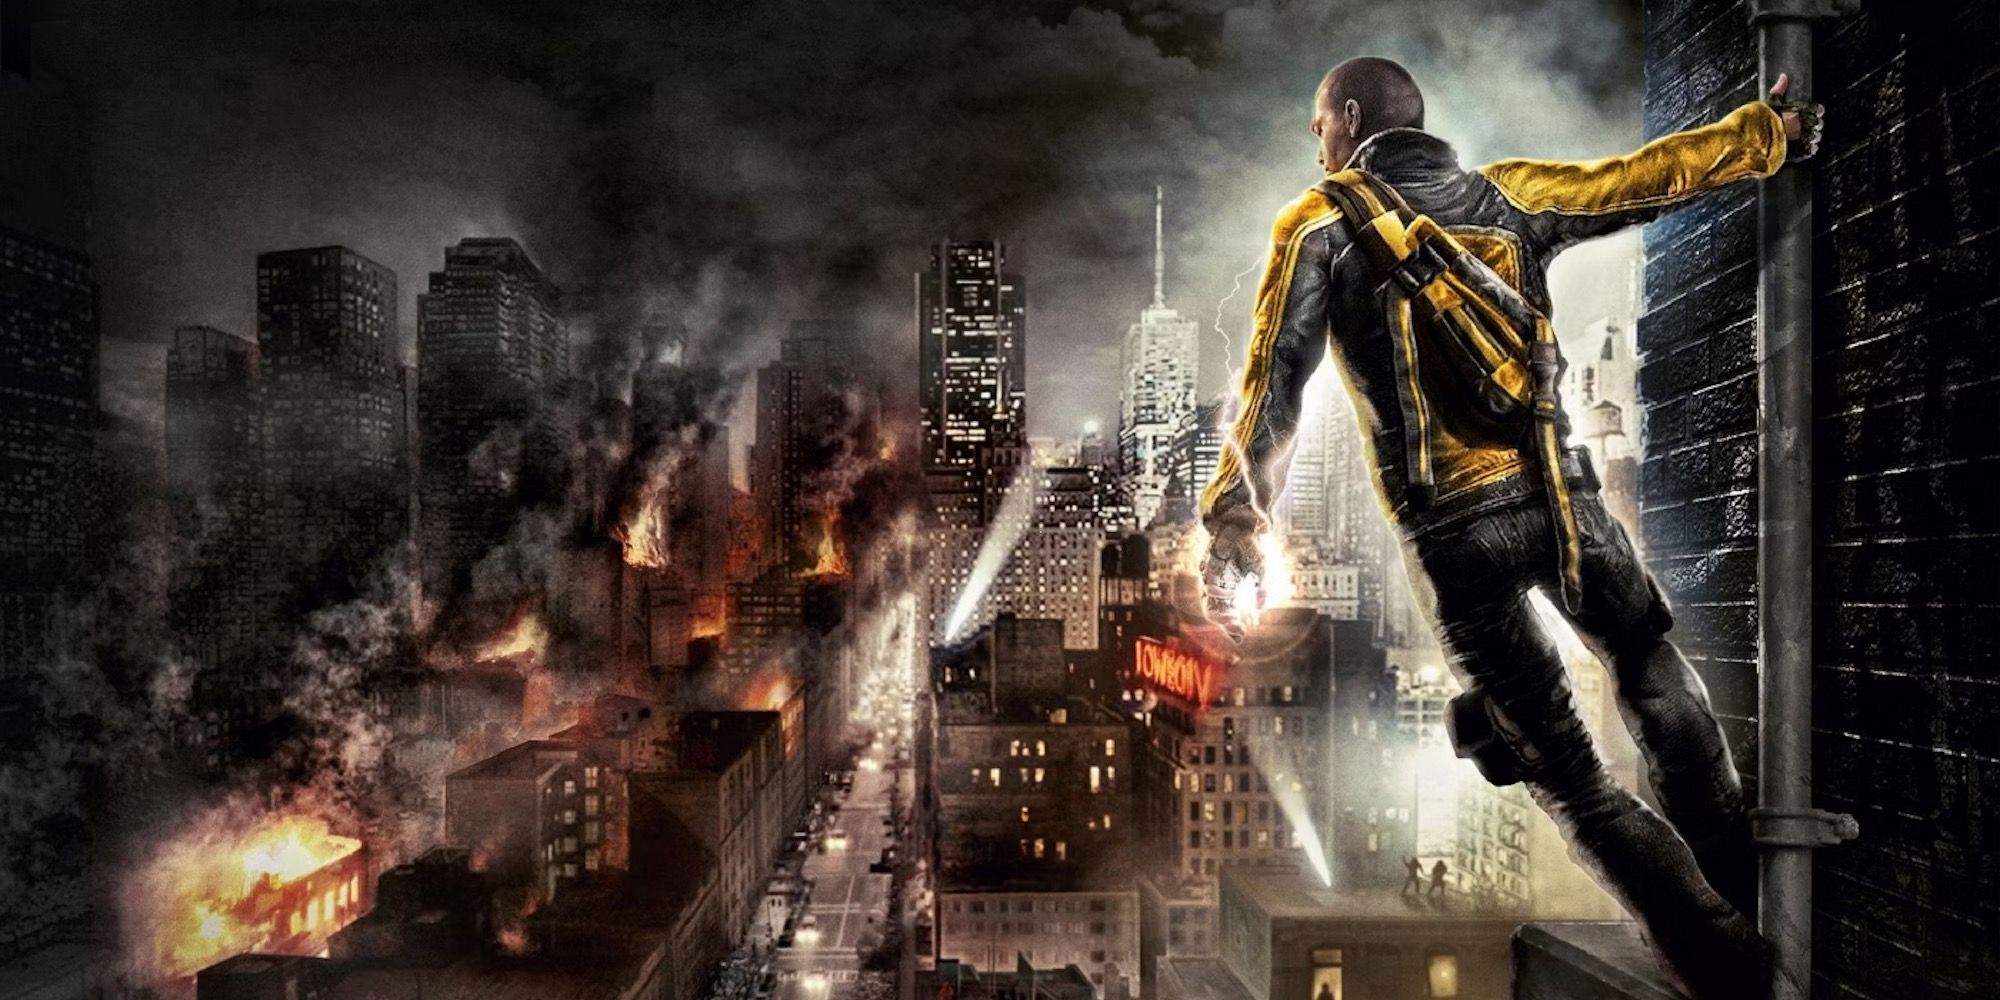 Promo art featuring Cole in inFamous